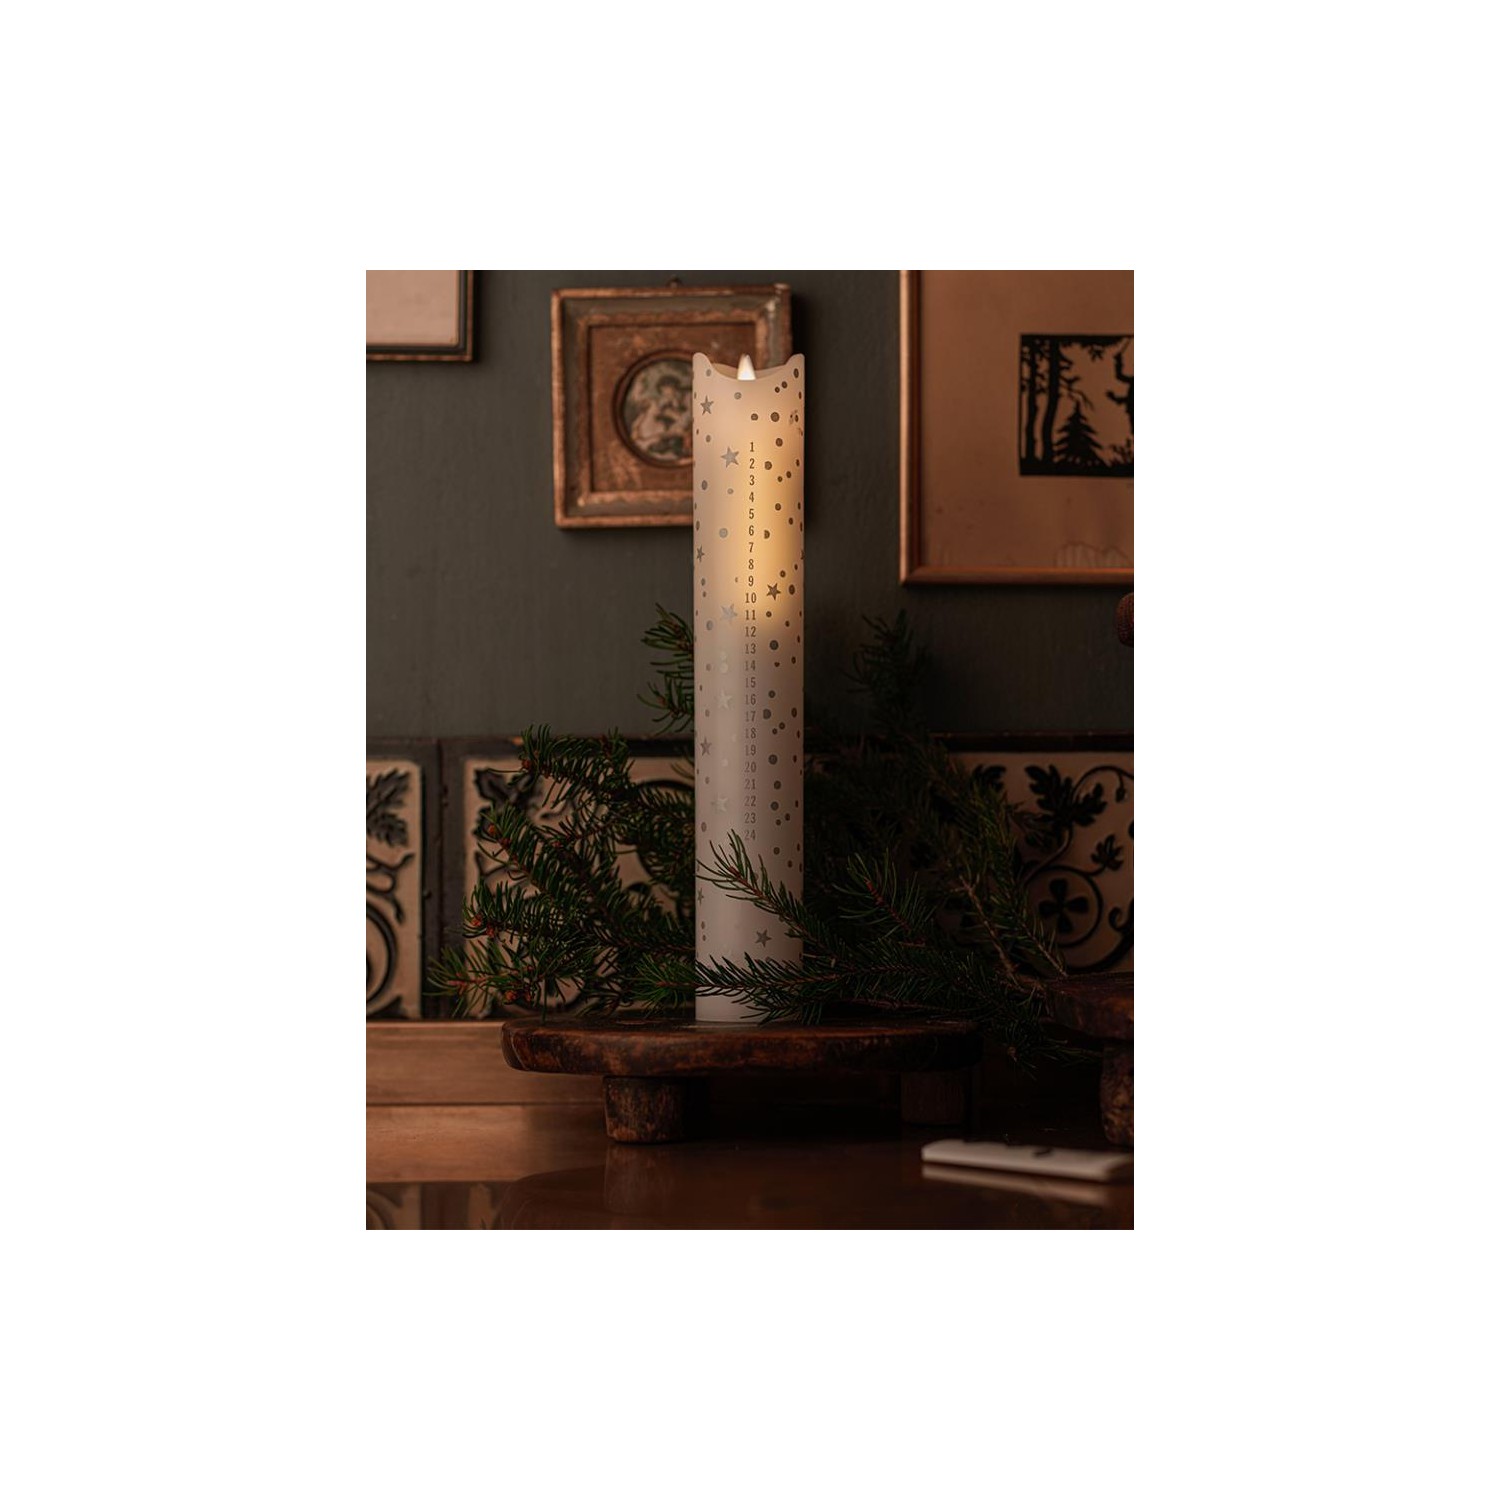 Sirius Sara Calendar candle 29 cm, patterned in silver